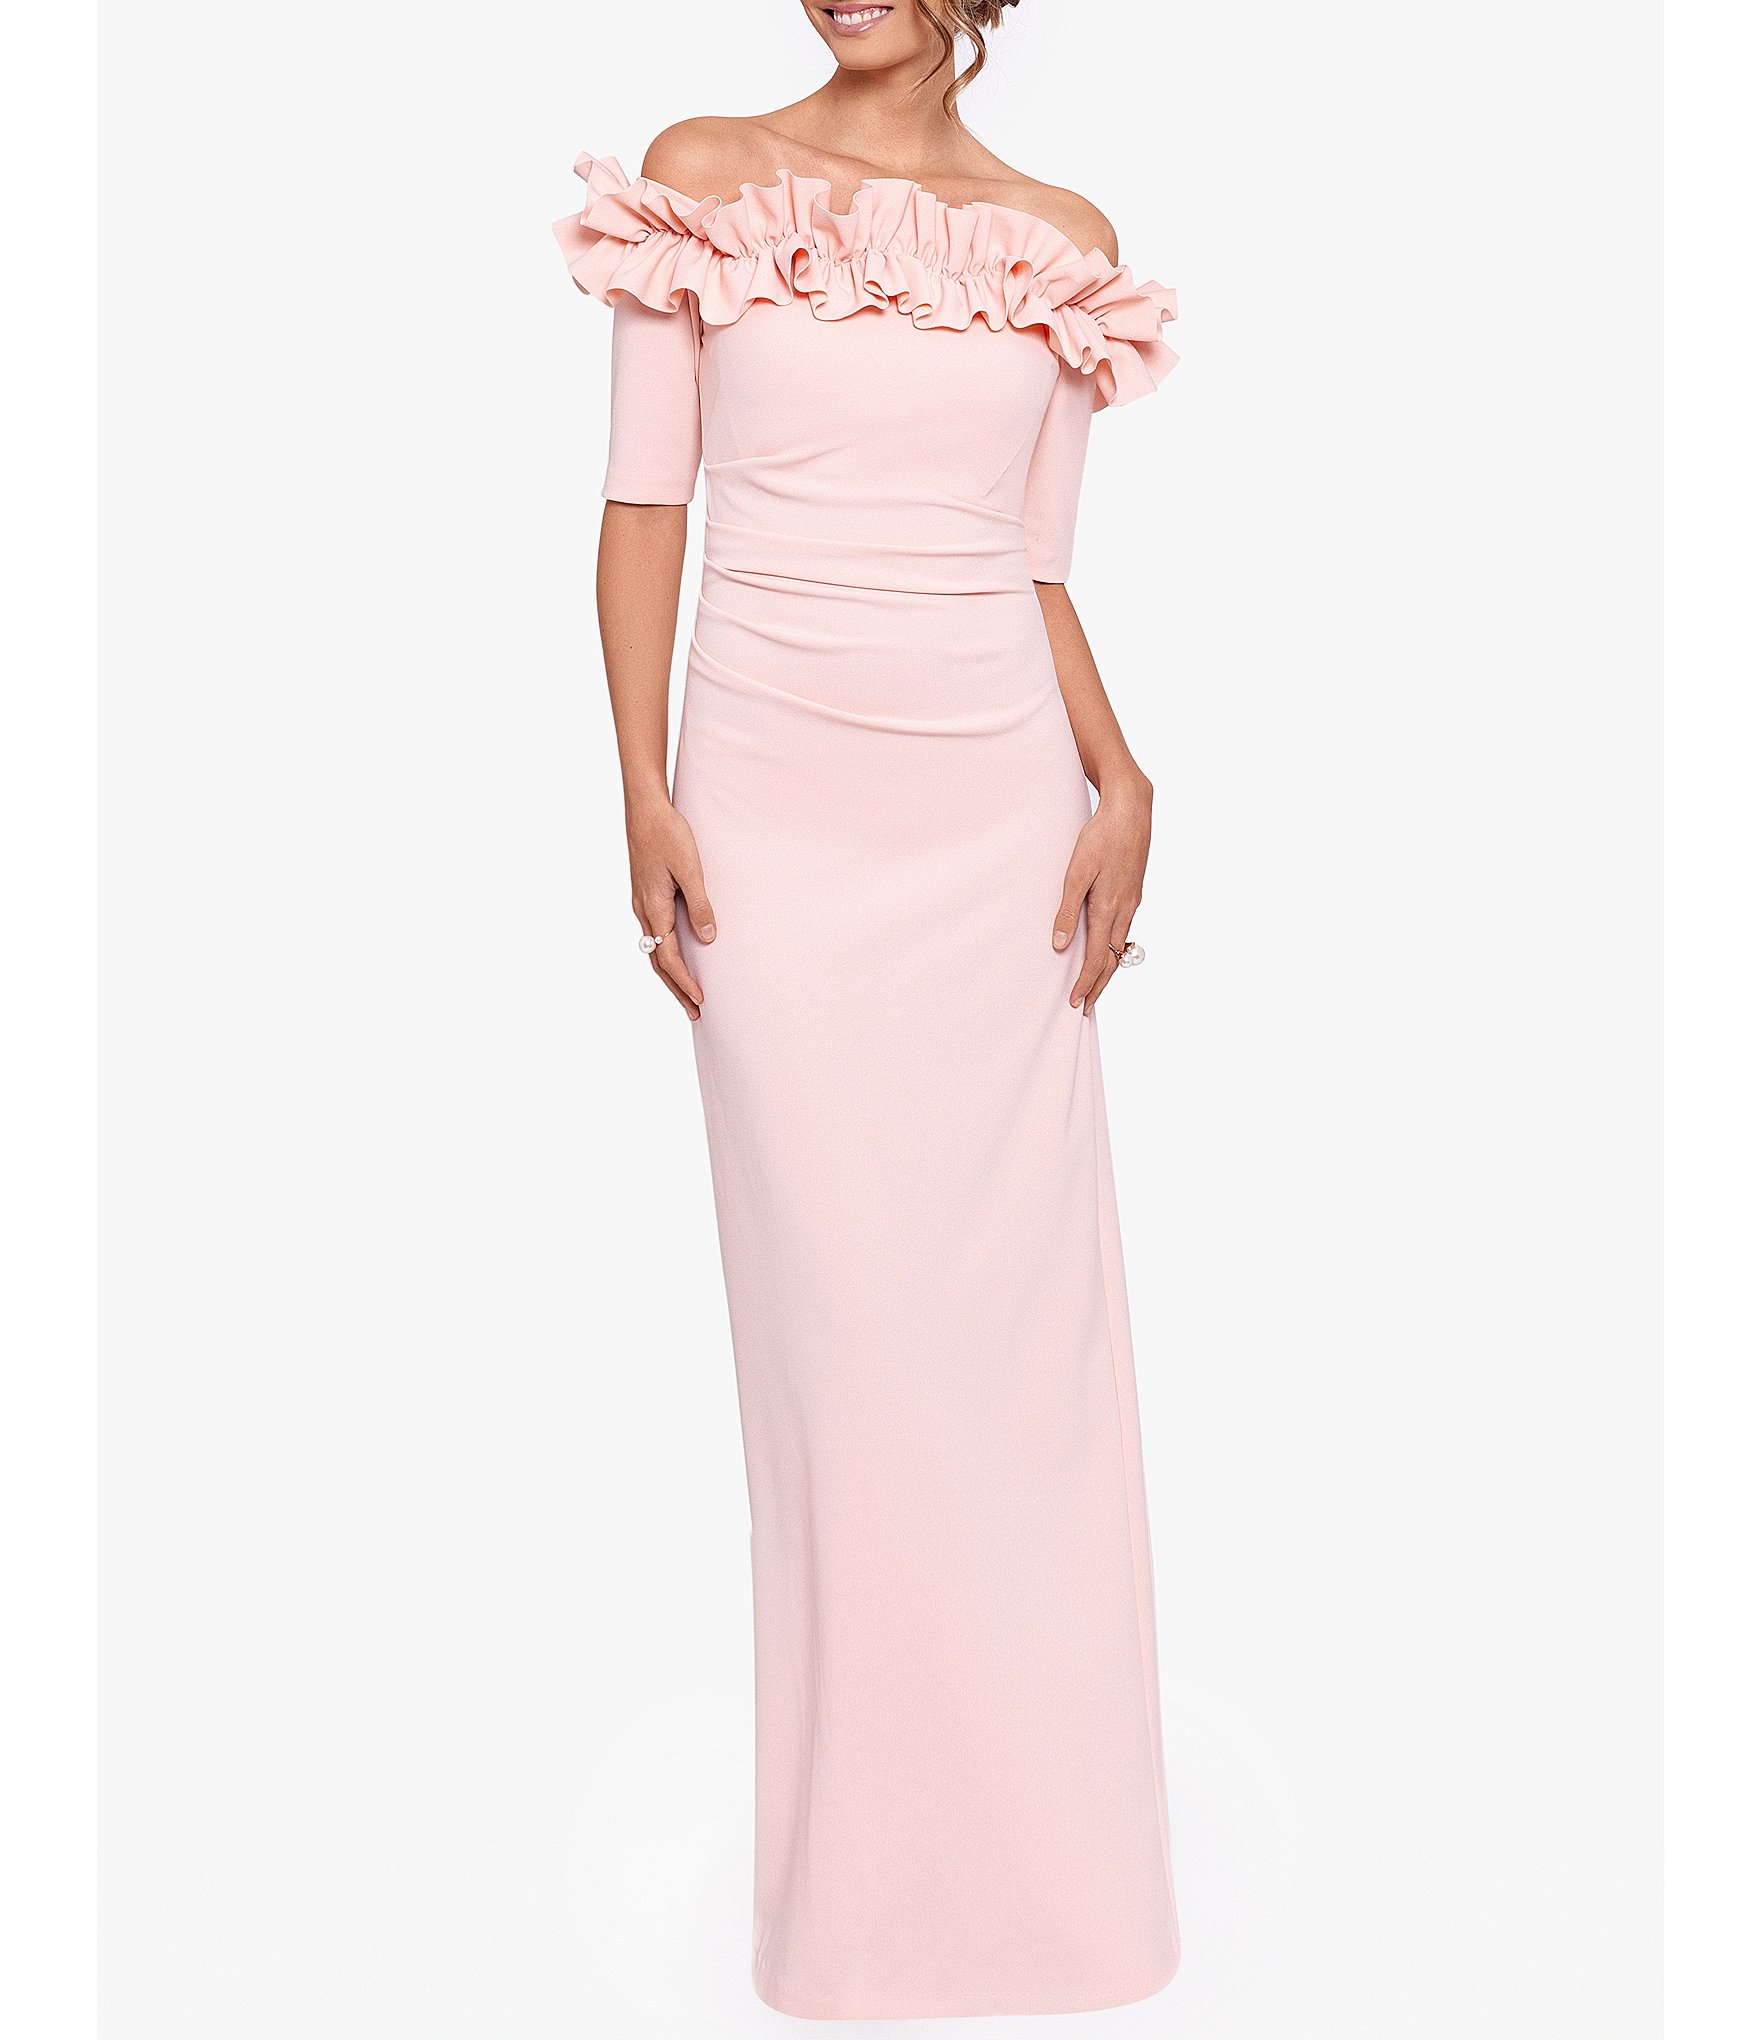 formal pink dress outfit